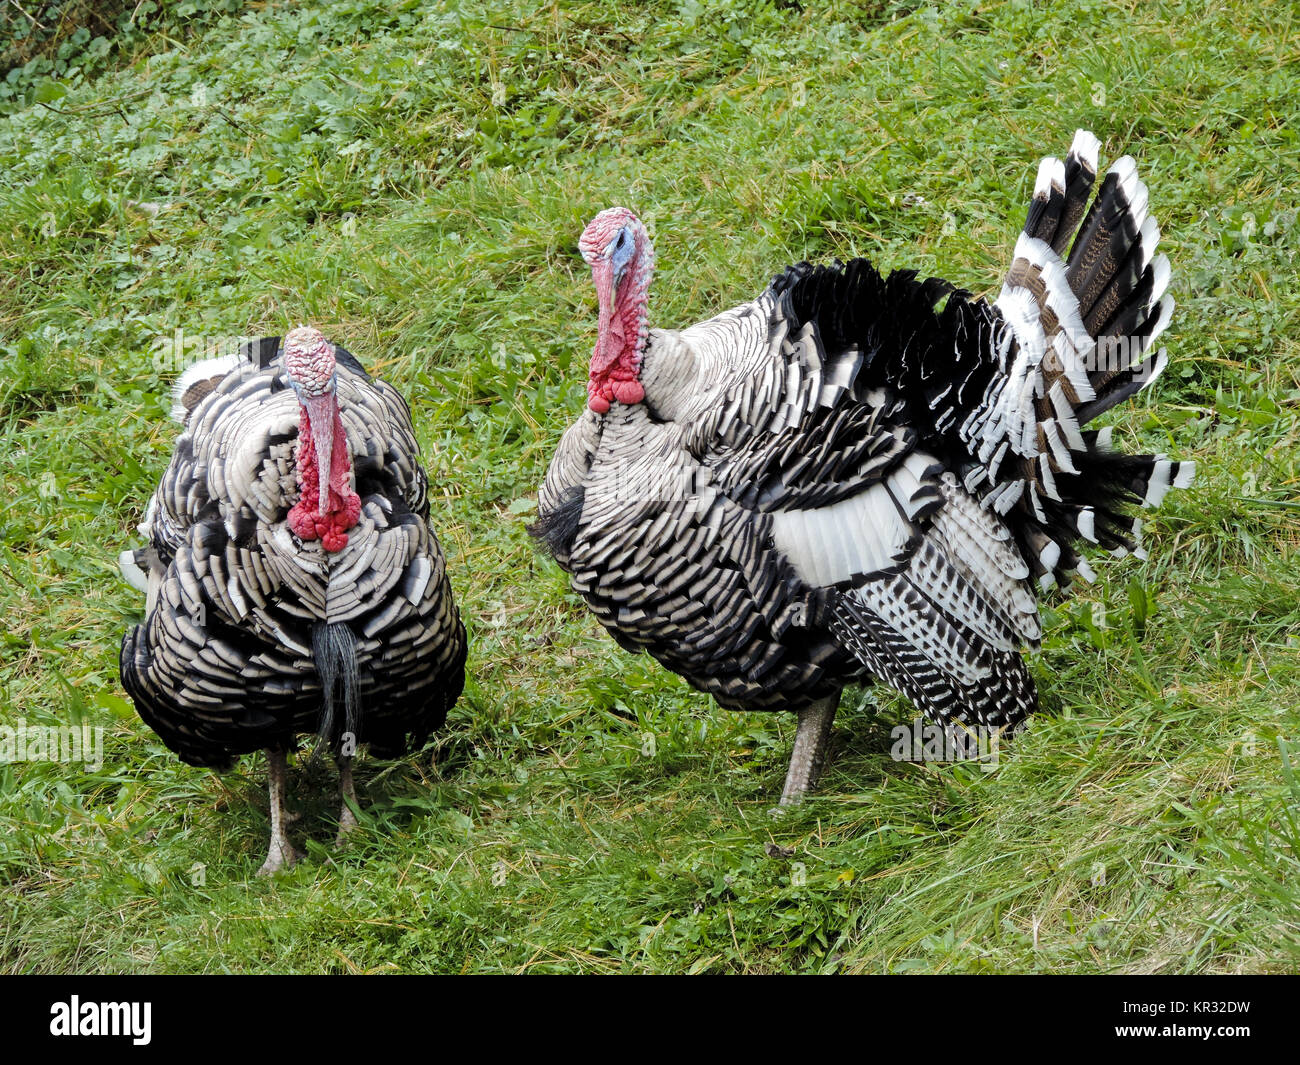 DOMESTIC TURKEY, NATIONAL FARM MUSEUM, COOPERSTOWN, NEW YORK Stock Photo